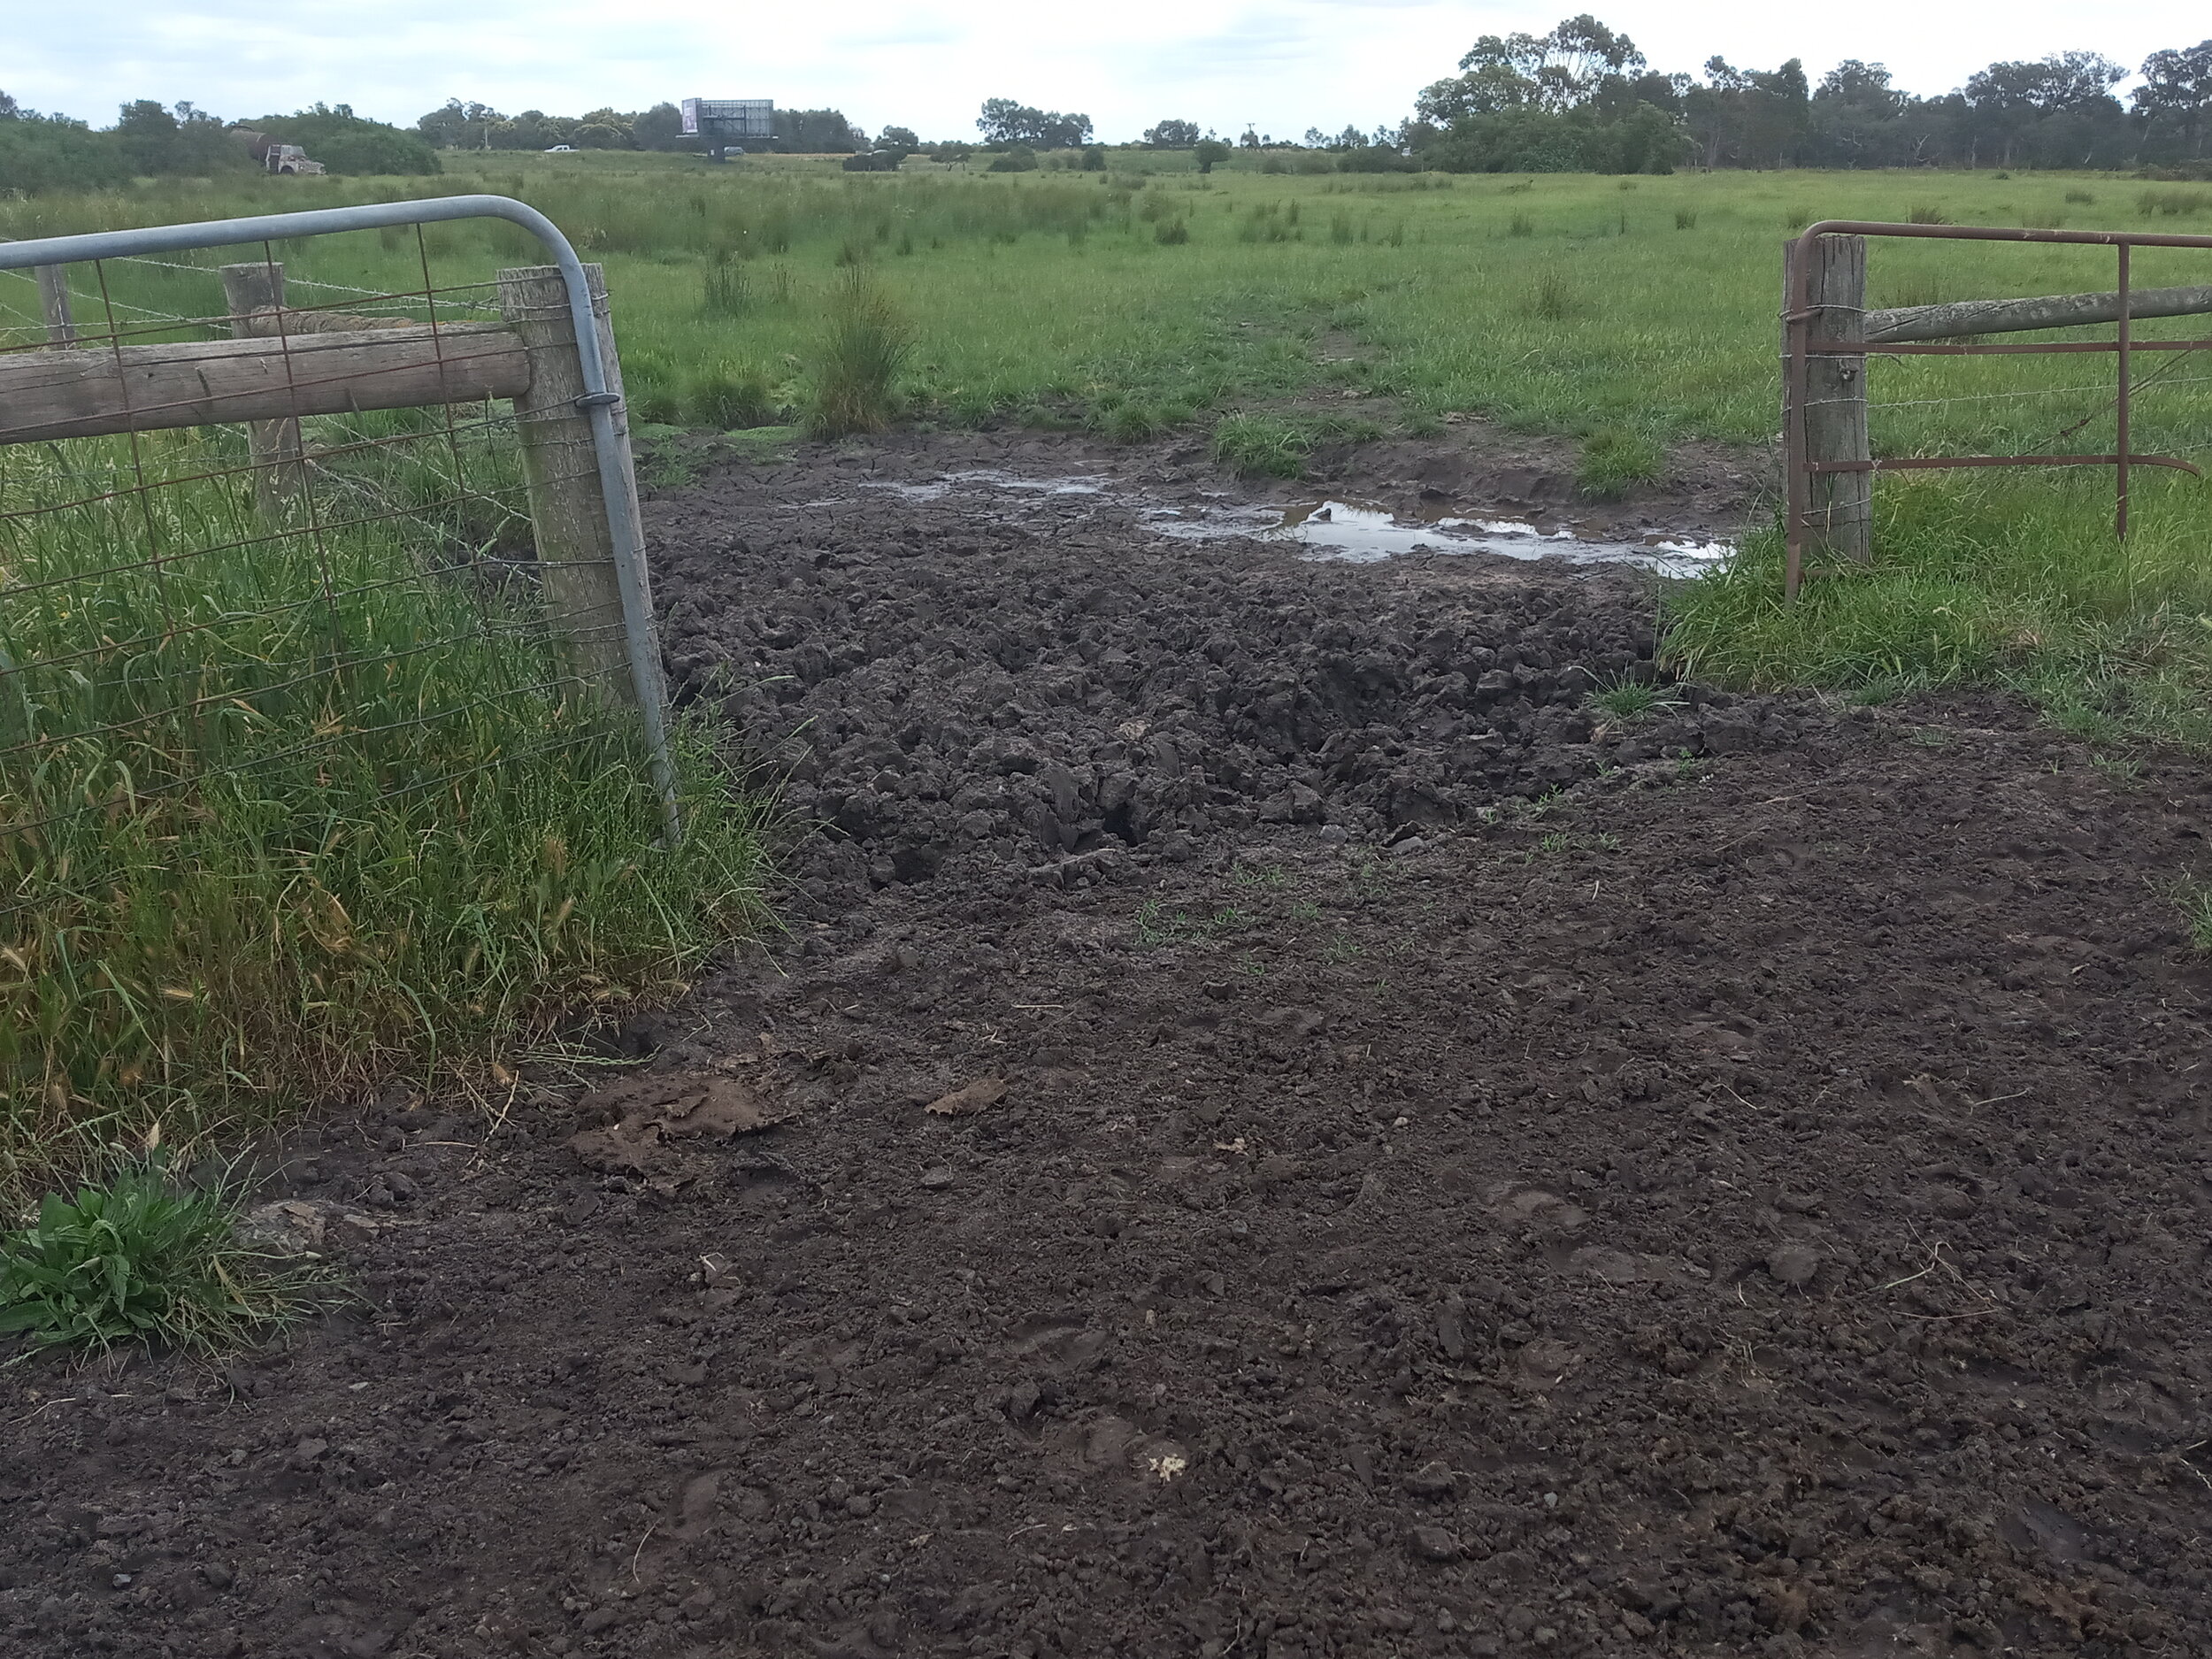  12/11  The farmer (Wes) to the north uses this entrance beside our Gate 2 to get his cattle to MX MX allows him to graze cattle free of charge  This gate must be kept closed at all times 